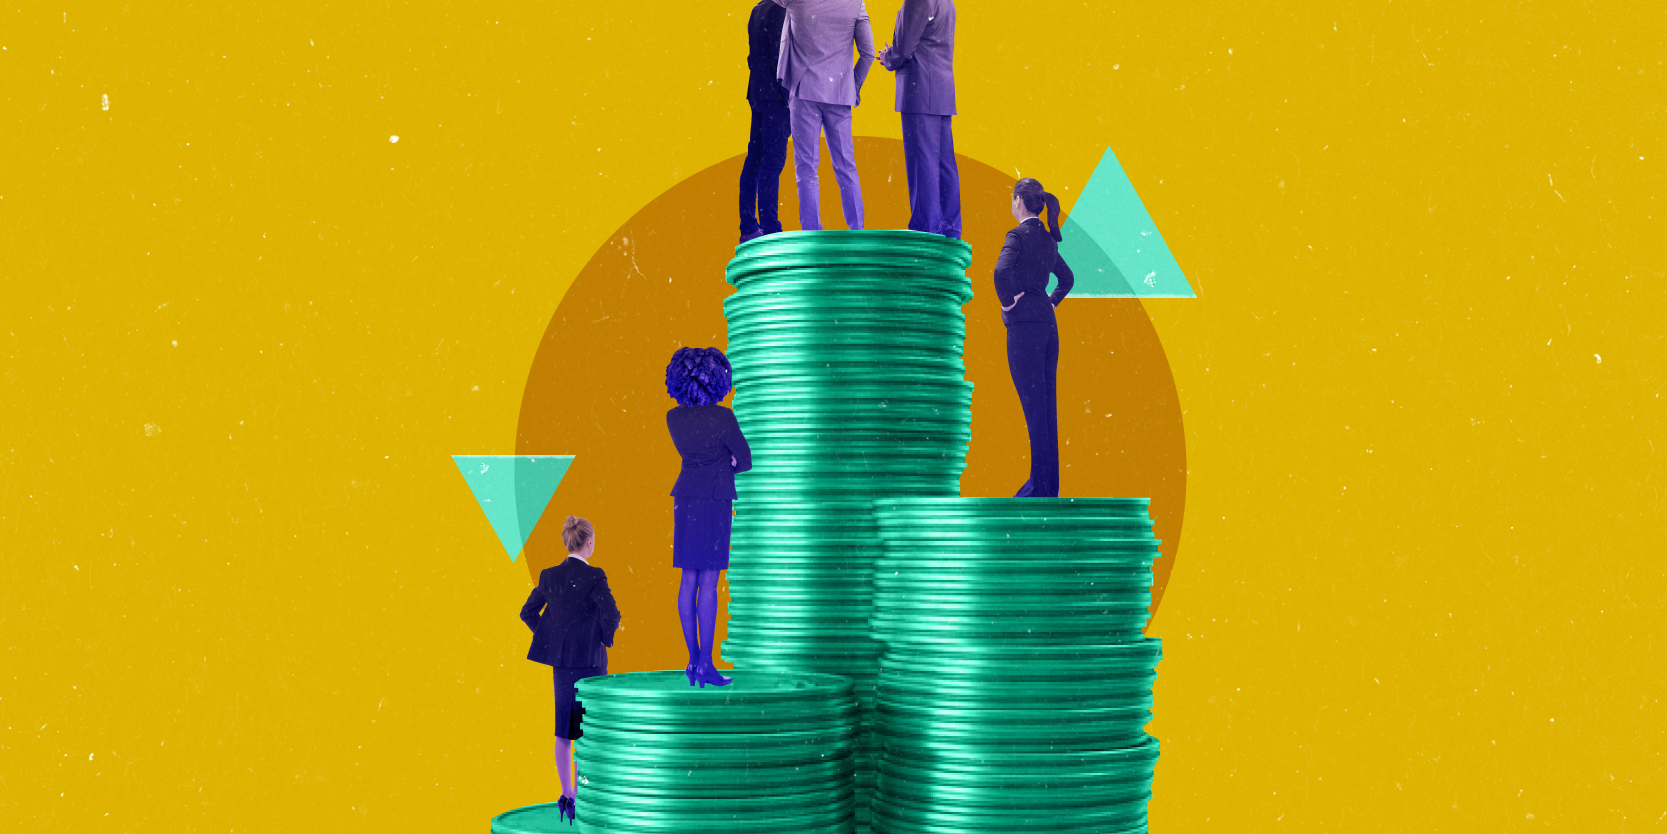 Women of Means series, women and investing: Four uneven stacks of coins, standing on the shorter stacks are women, and on the tallest stack, a group of men converses